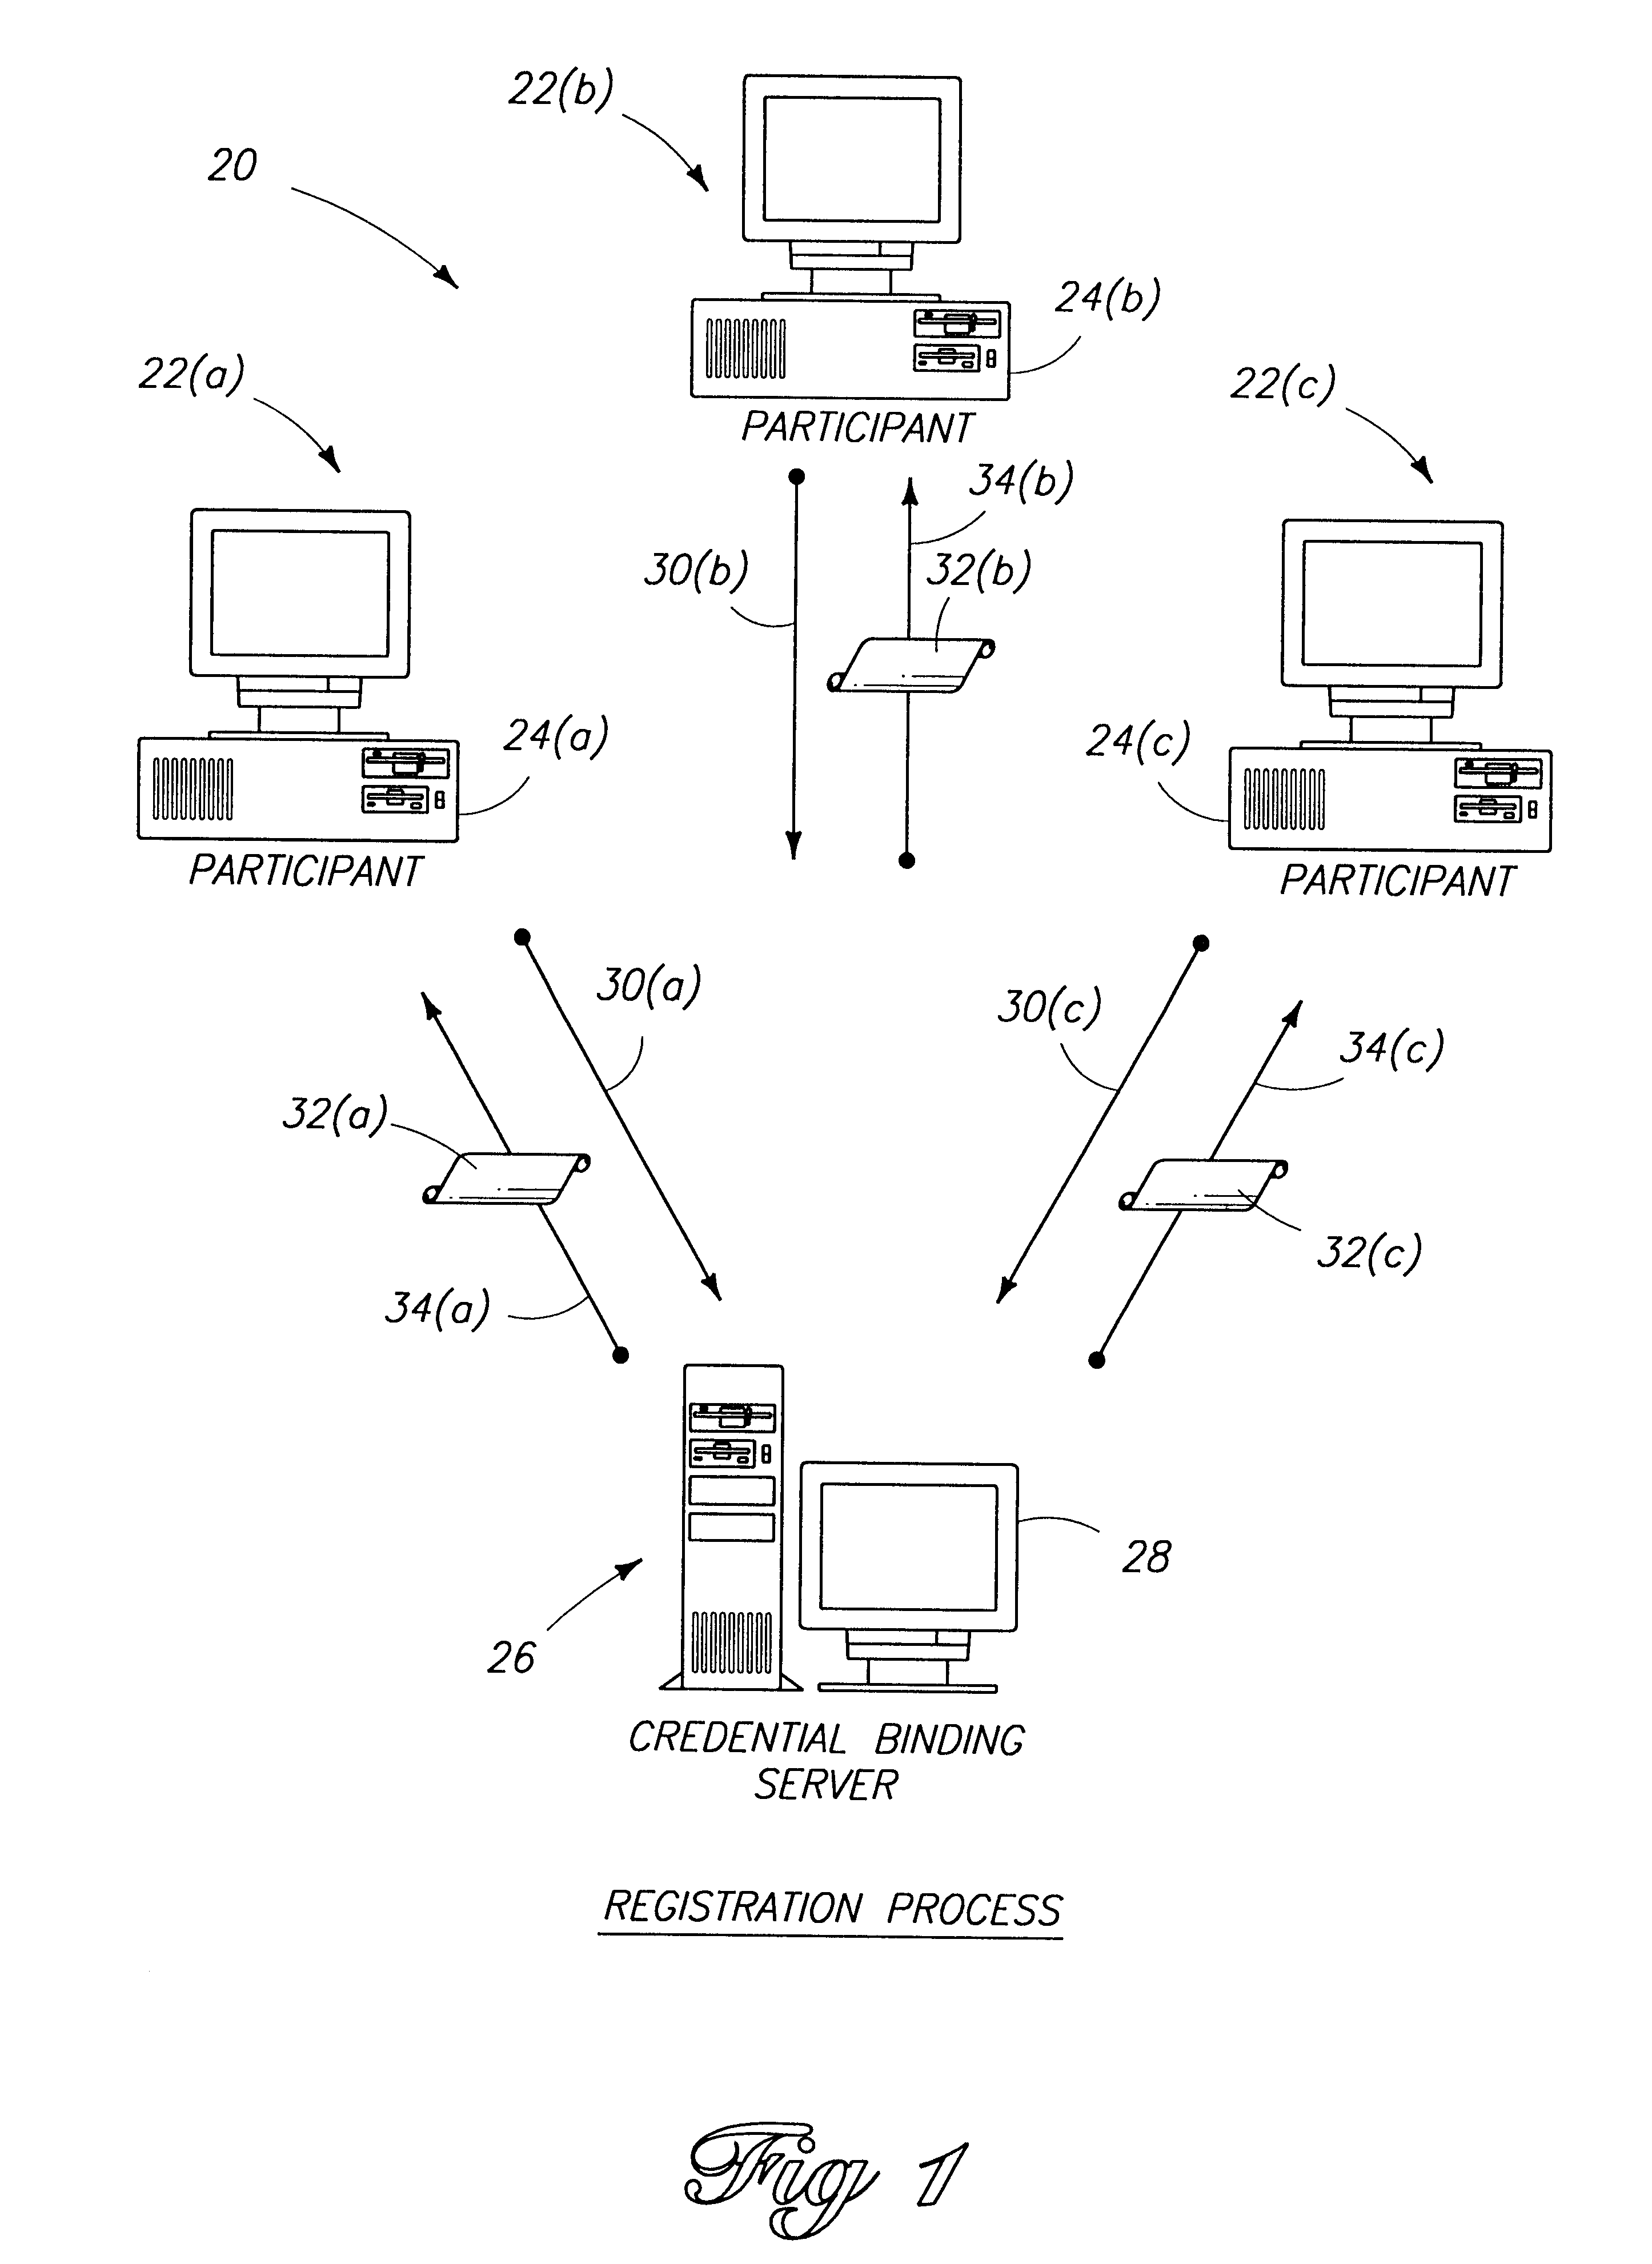 Cryptography system and method for providing cryptographic services for a computer application